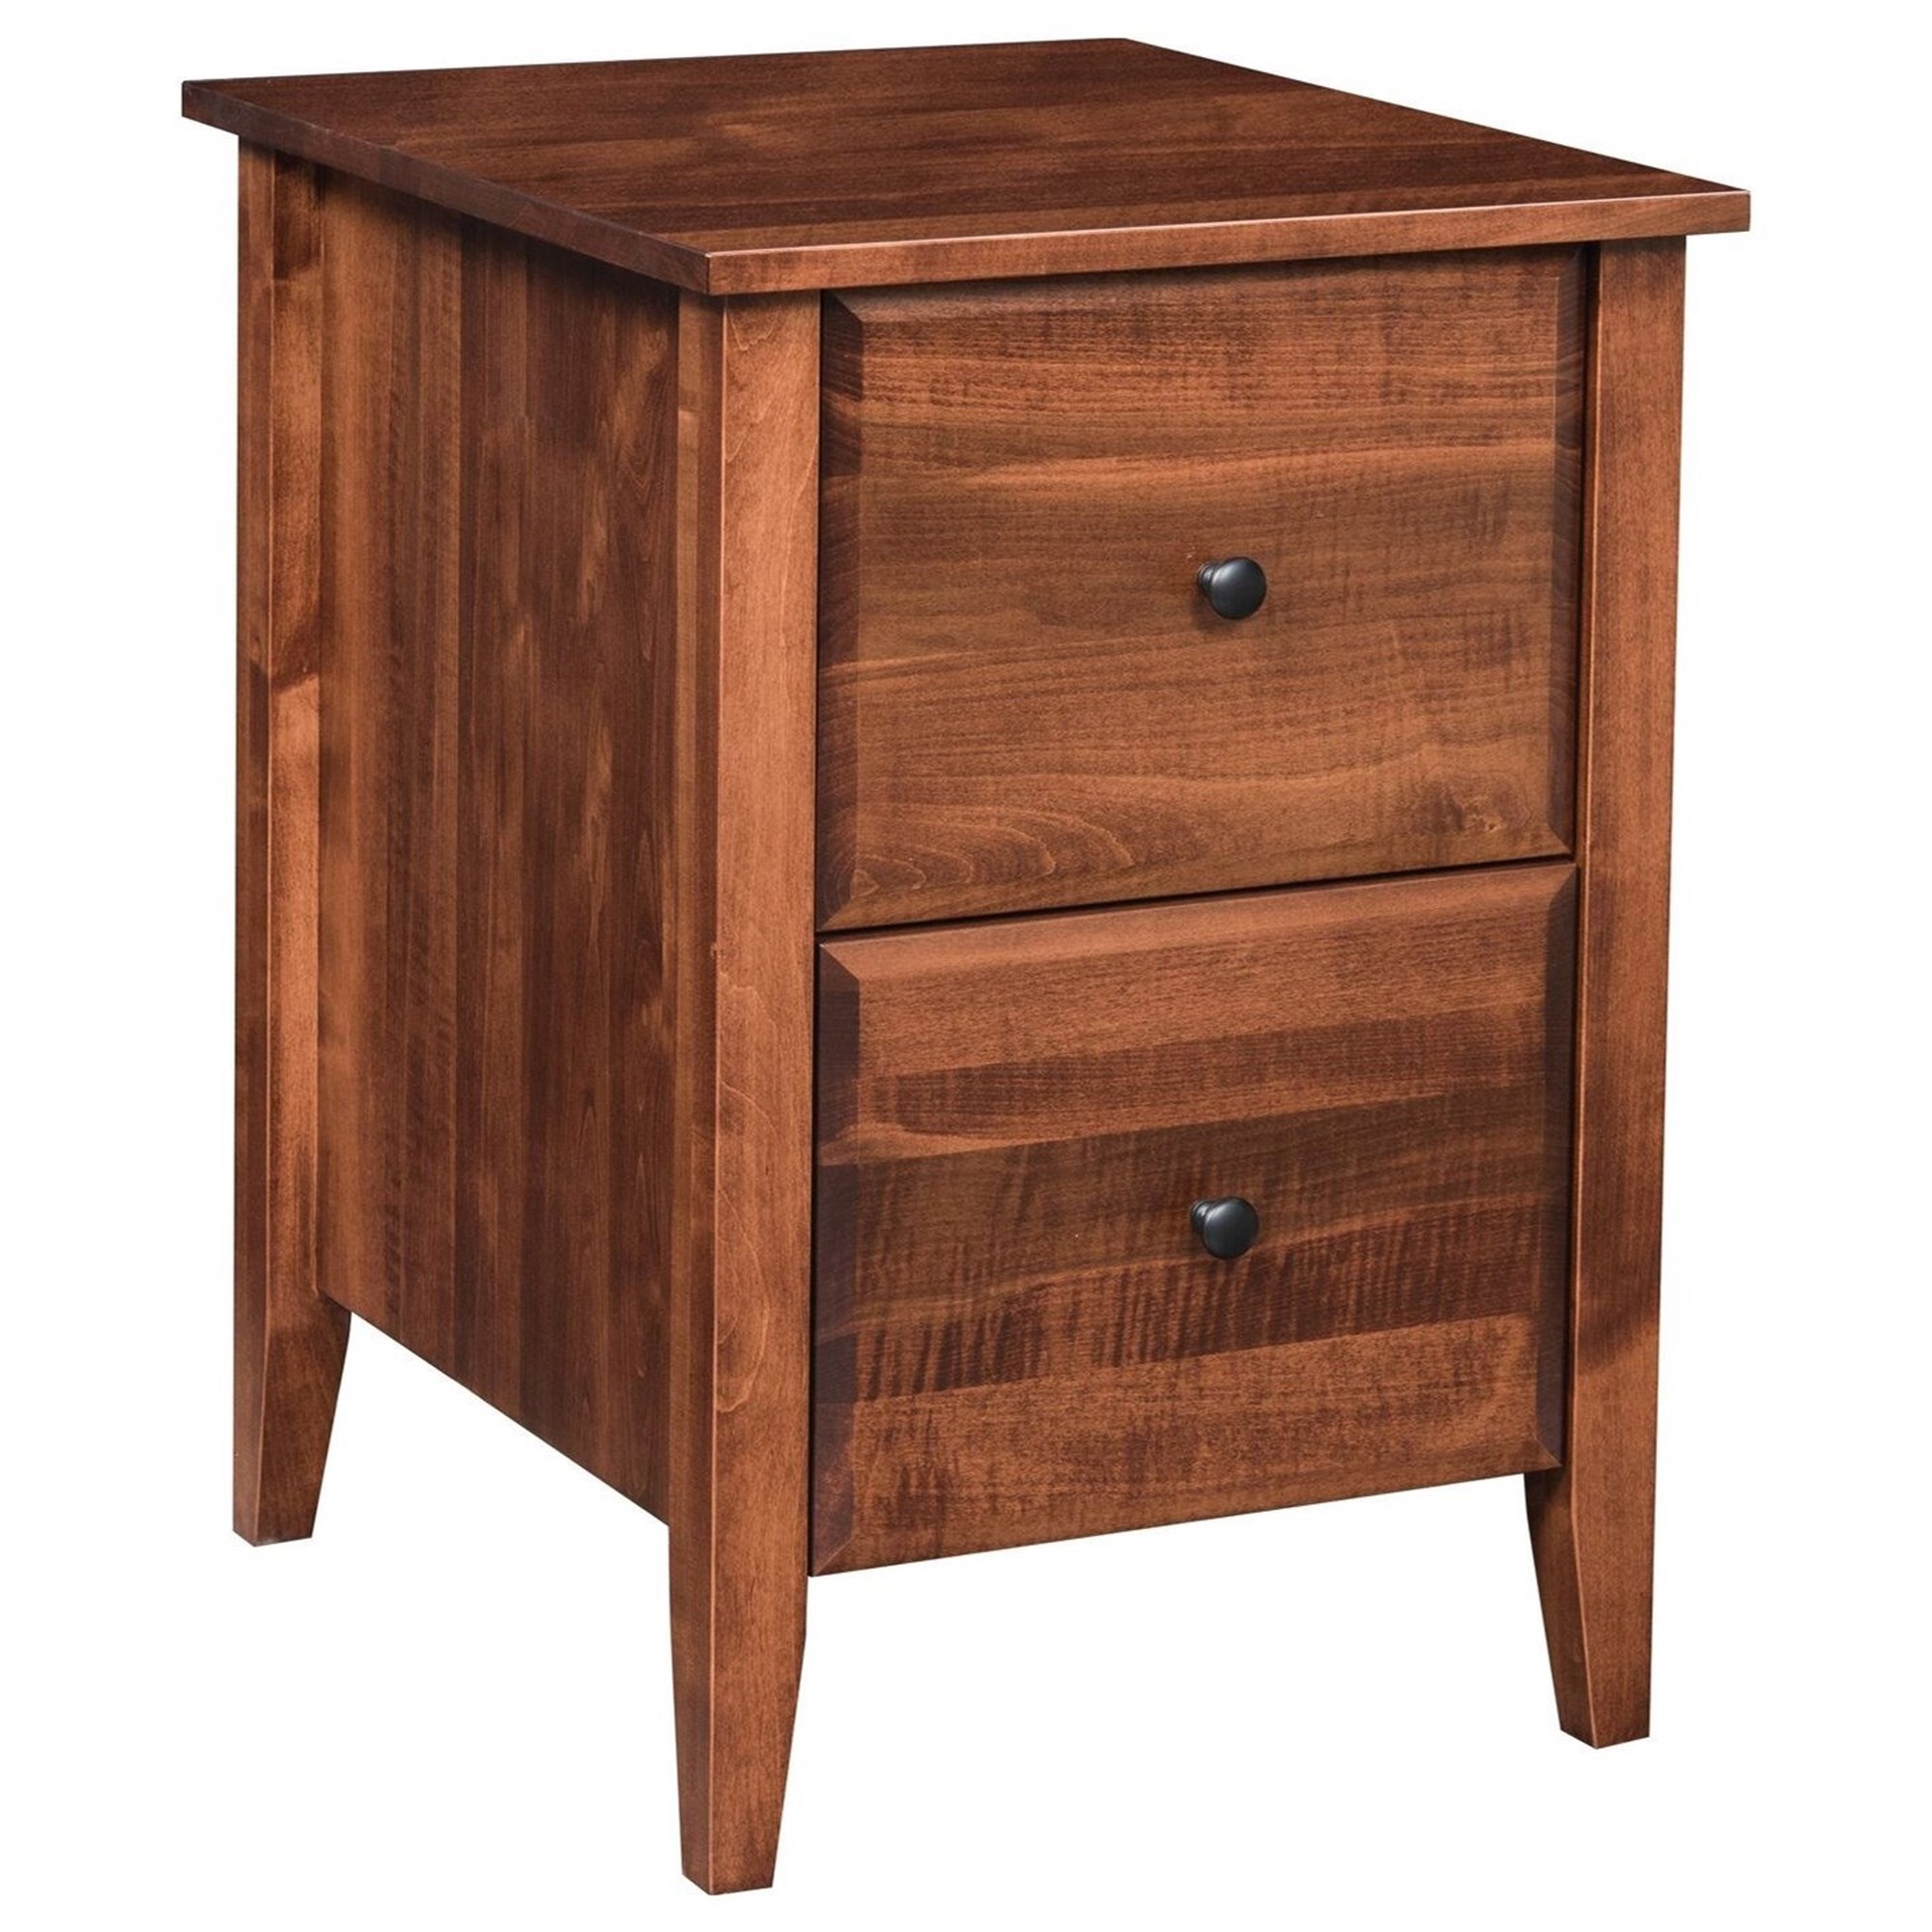 https://imageresizer4.furnituredealer.net/img/remote/images.furnituredealer.net/img/products%2Fmaple_hill_woodworking%2Fcolor%2Fhampton%203000_hm-3018-b1.jpg?width=2000&height=2000&scale=both